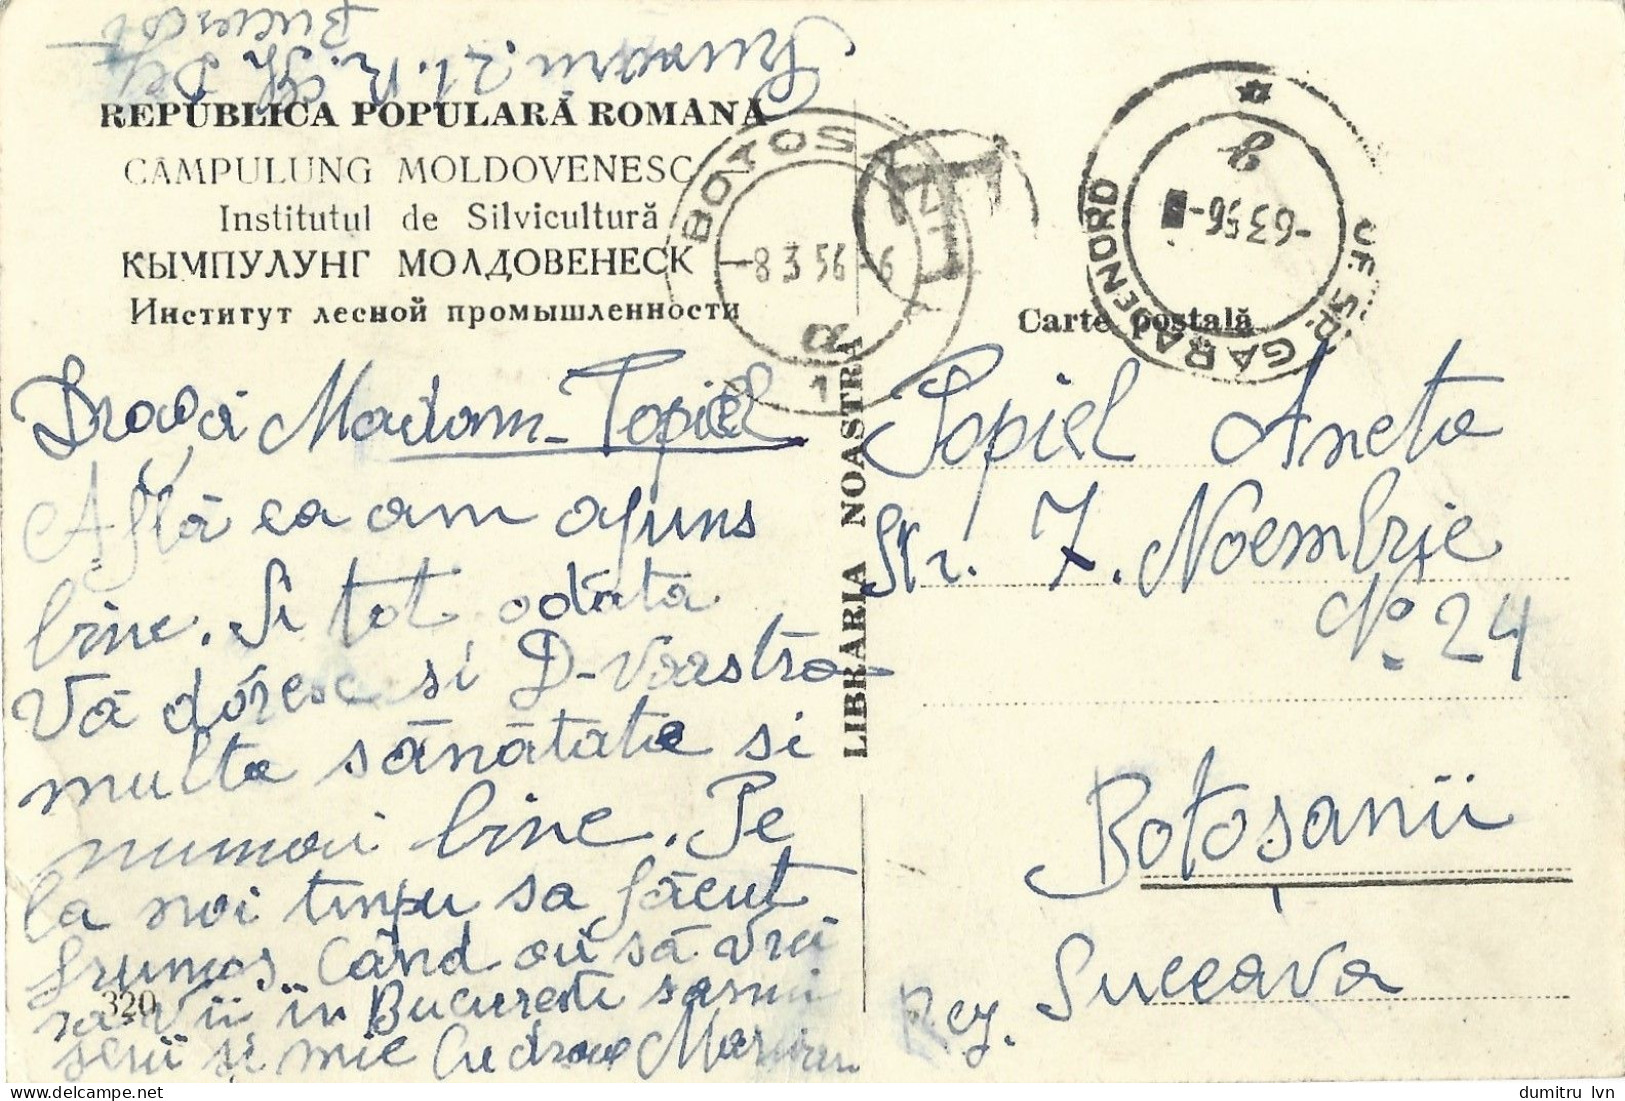 ROMANIA 1956 CAMPULUNG MOLDOVENESC - THE INSTITUTE OF FORESTRY, BUILDING, PARK, FOREST, MOUNTAIN LANDSCAPE POSTAGE DUE - Portomarken